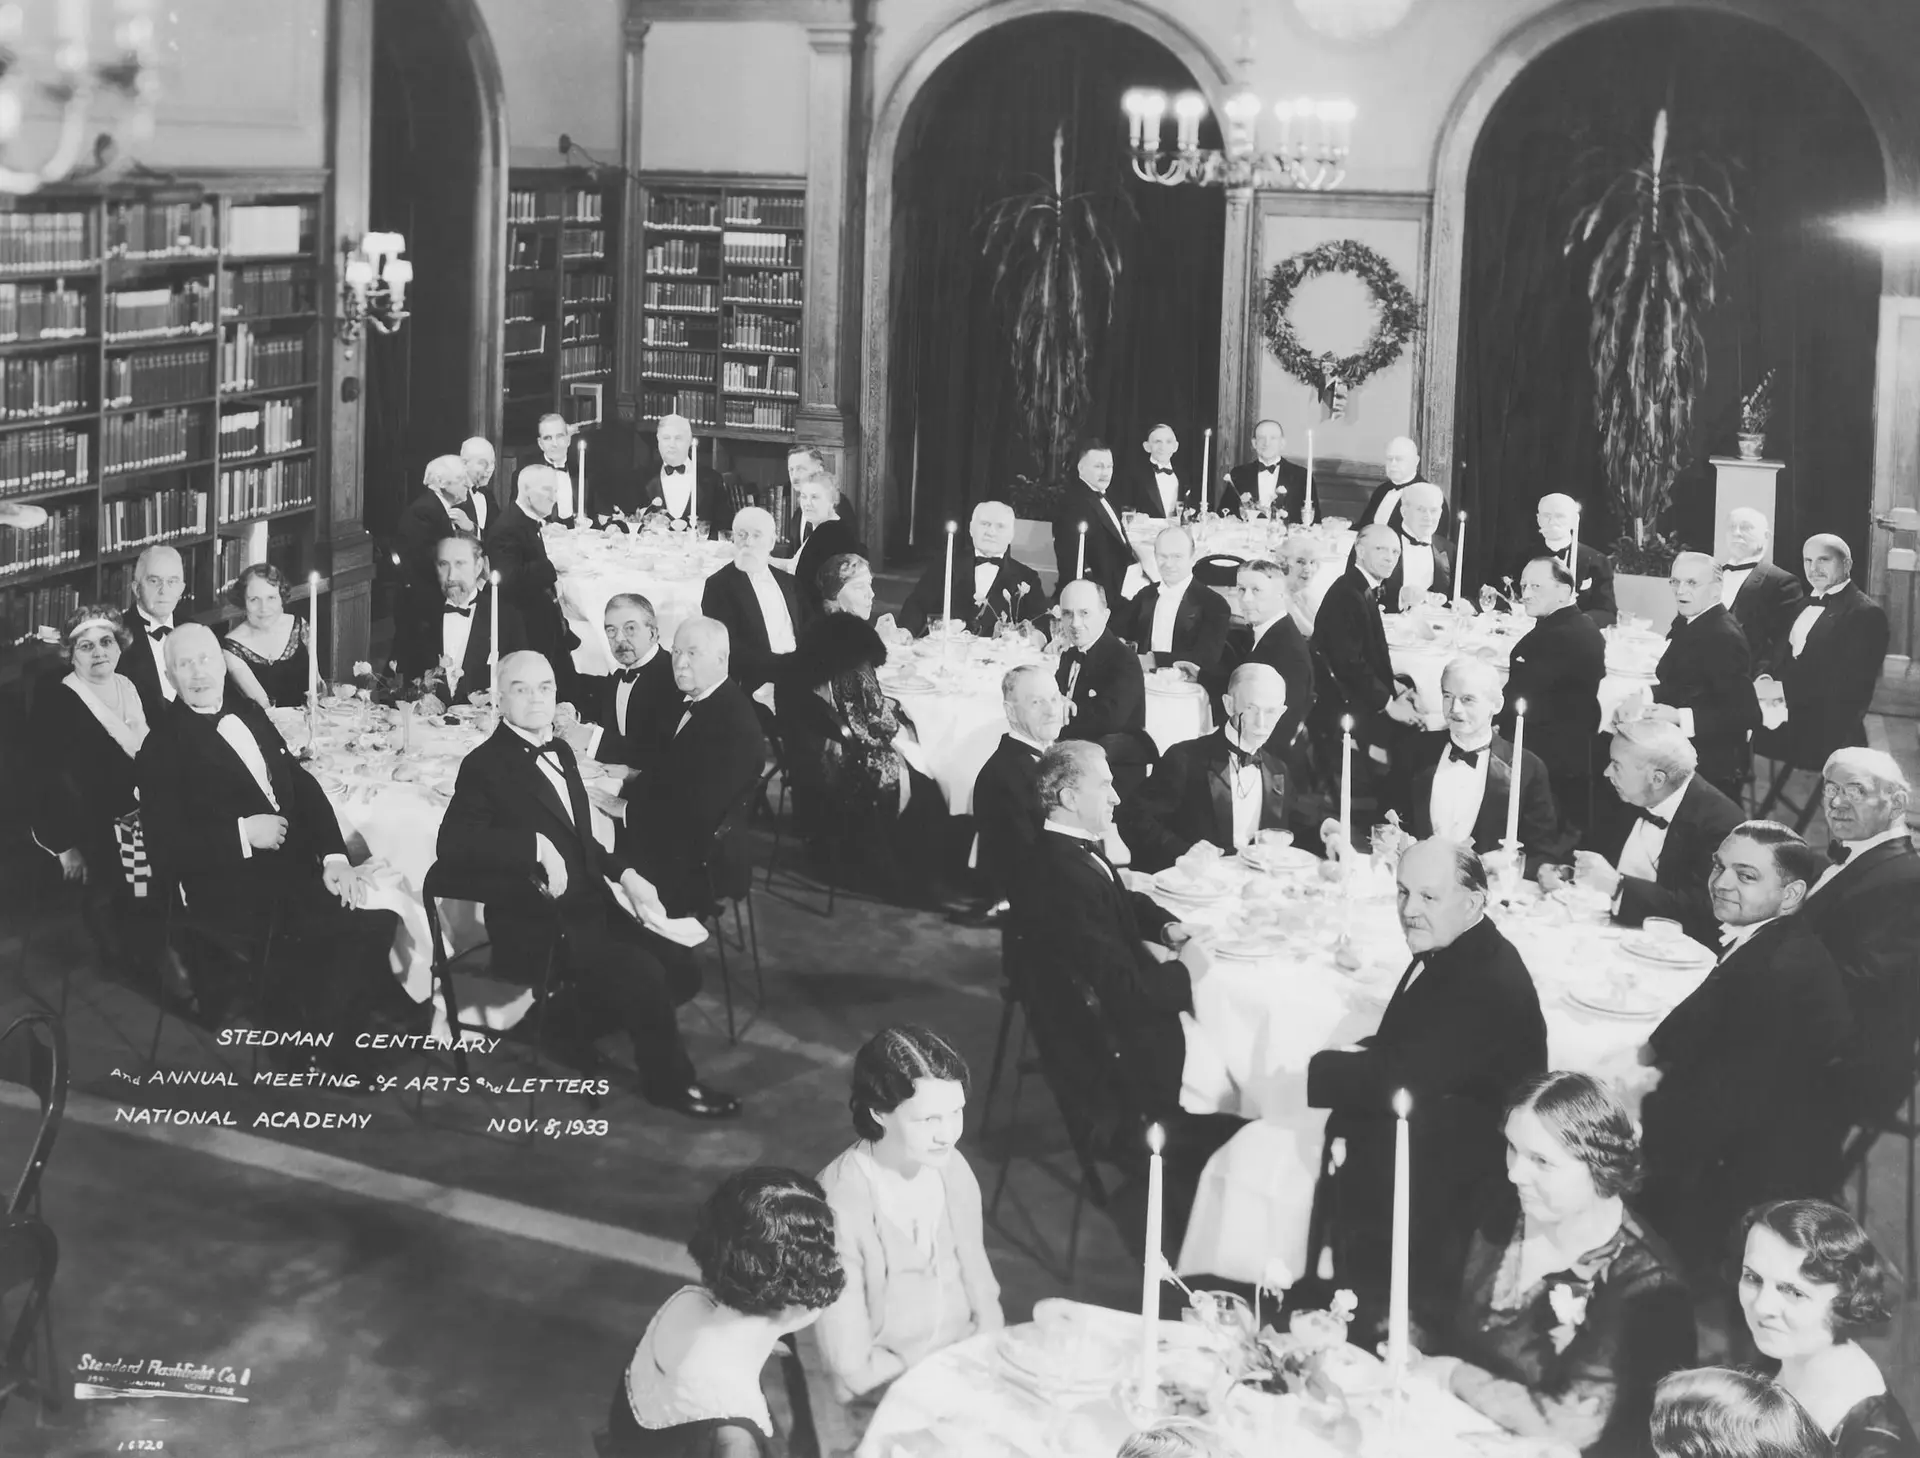 A library filled with several dozen people seated at round dining tables